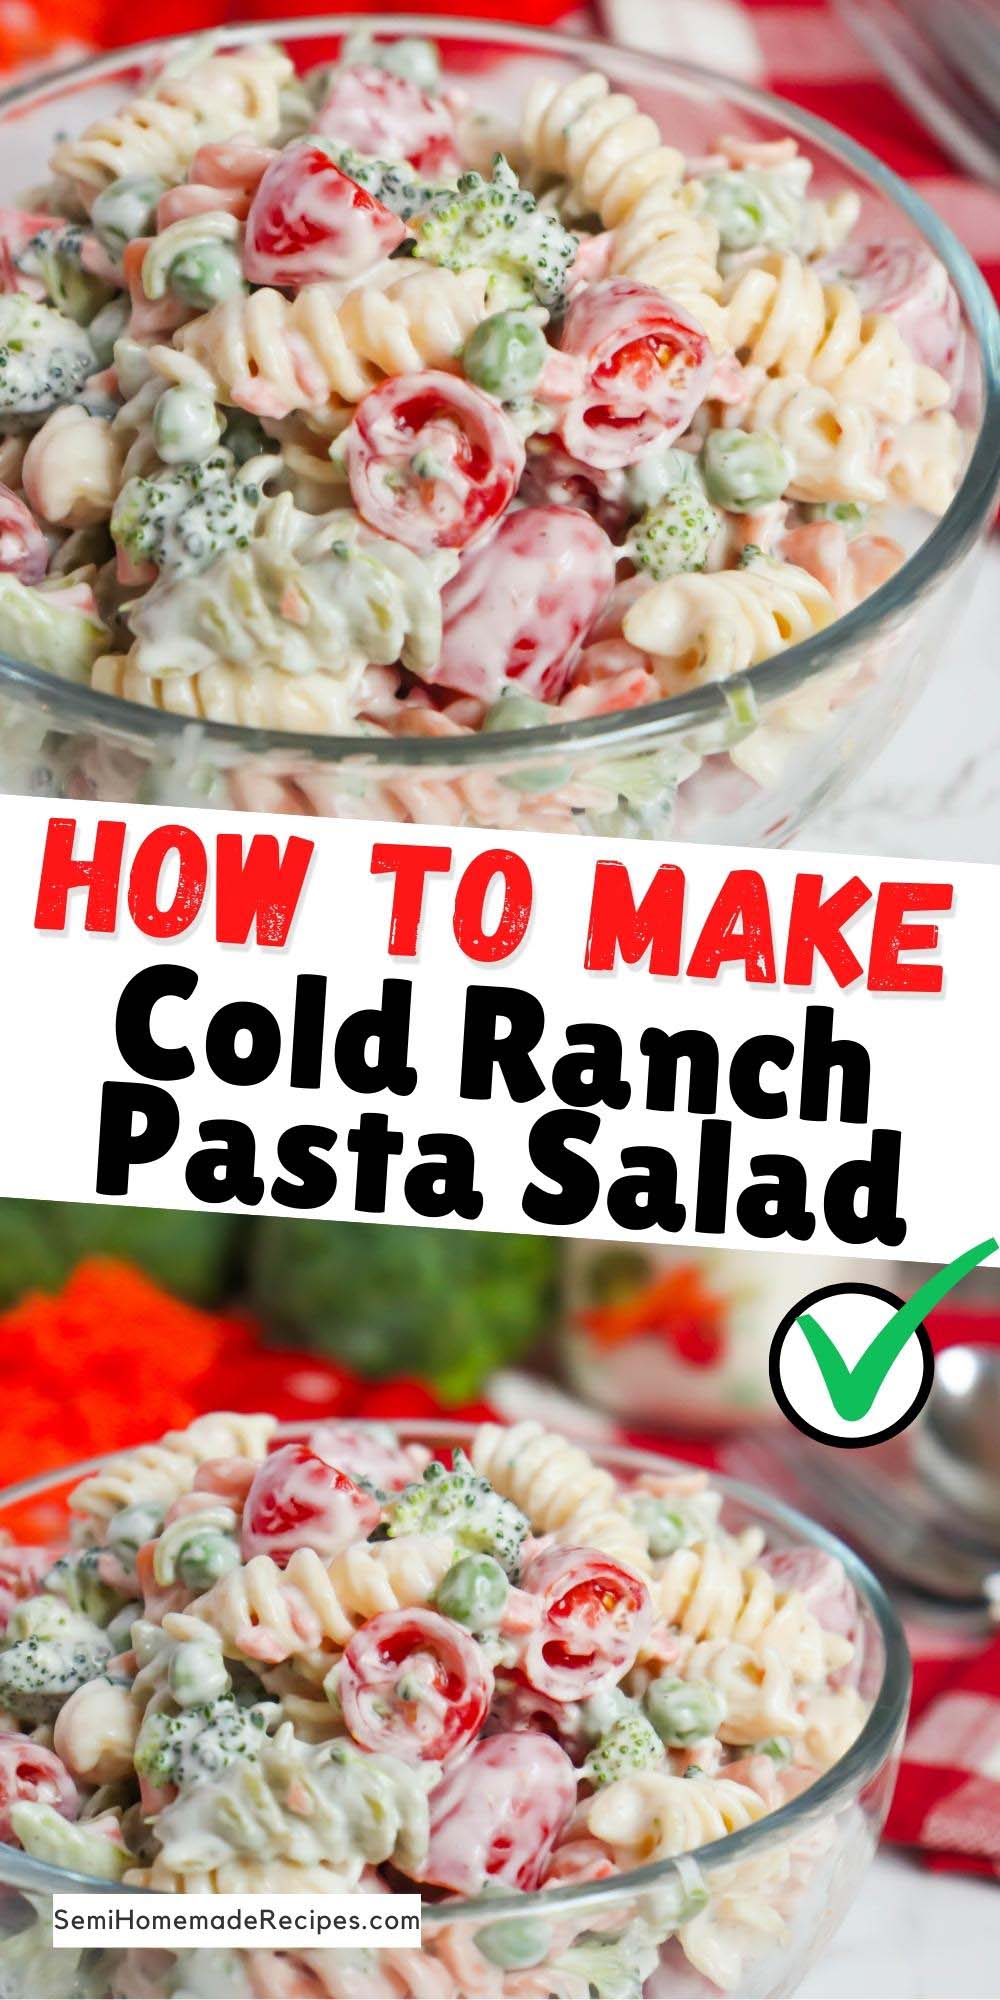 Cold Ranch Pasta Salad - Tri Colored Rotini is mixed together with halved cherry tomatoes, fresh broccoli florets, green peas, matchbox carrots and cold ranch dressing for a super easy summer pasta salad!